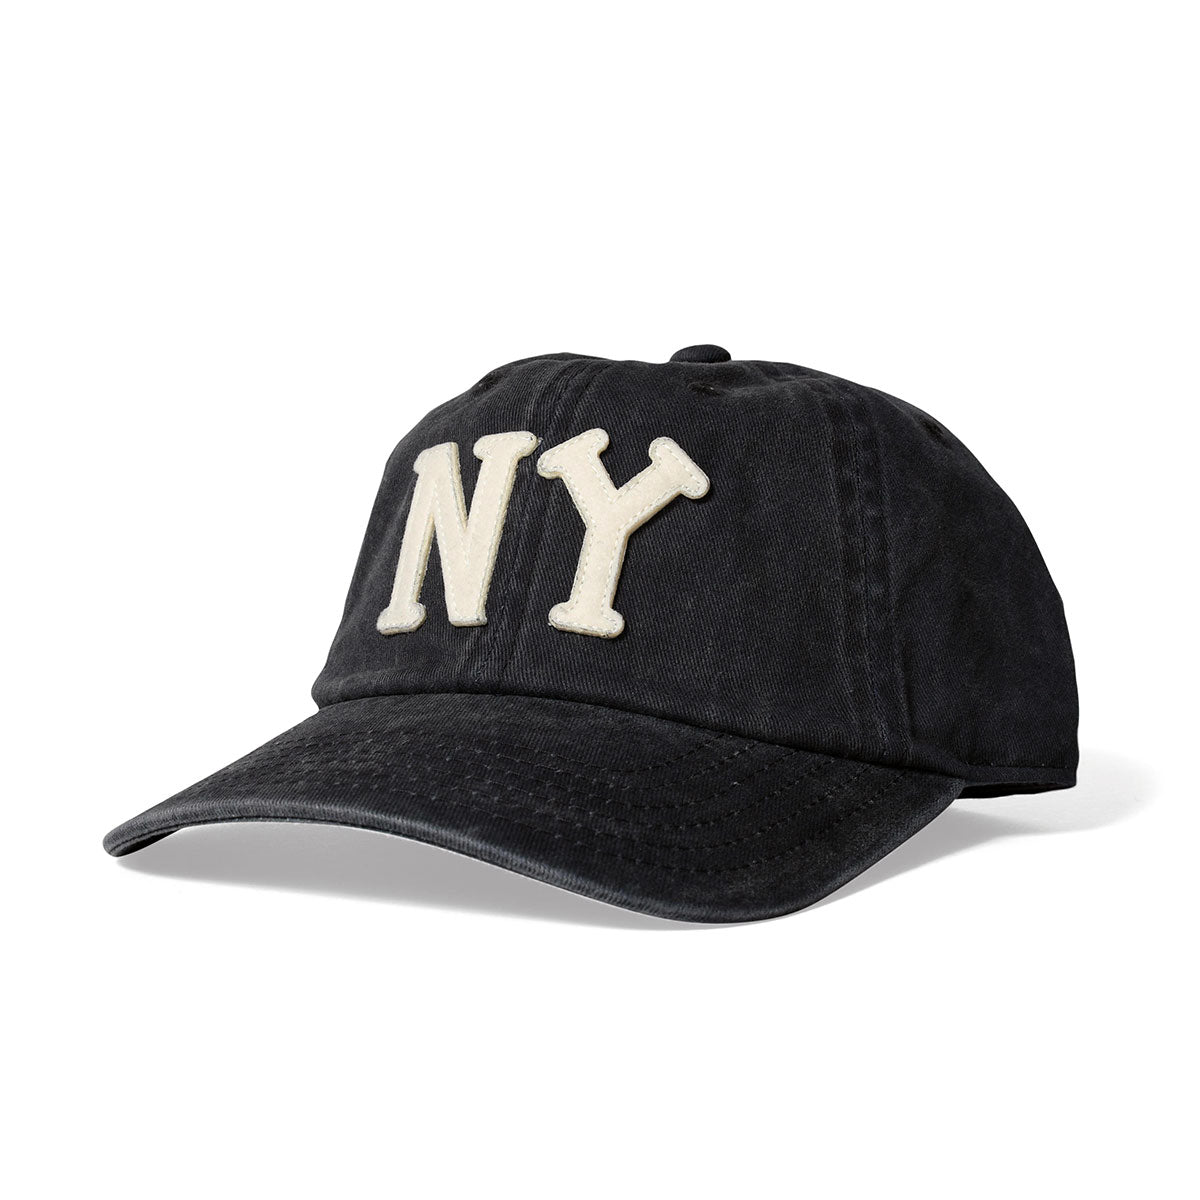 AMERICAN NEEDLE 44747BNBY Archive - NY Black Yankees [44747BNBY]